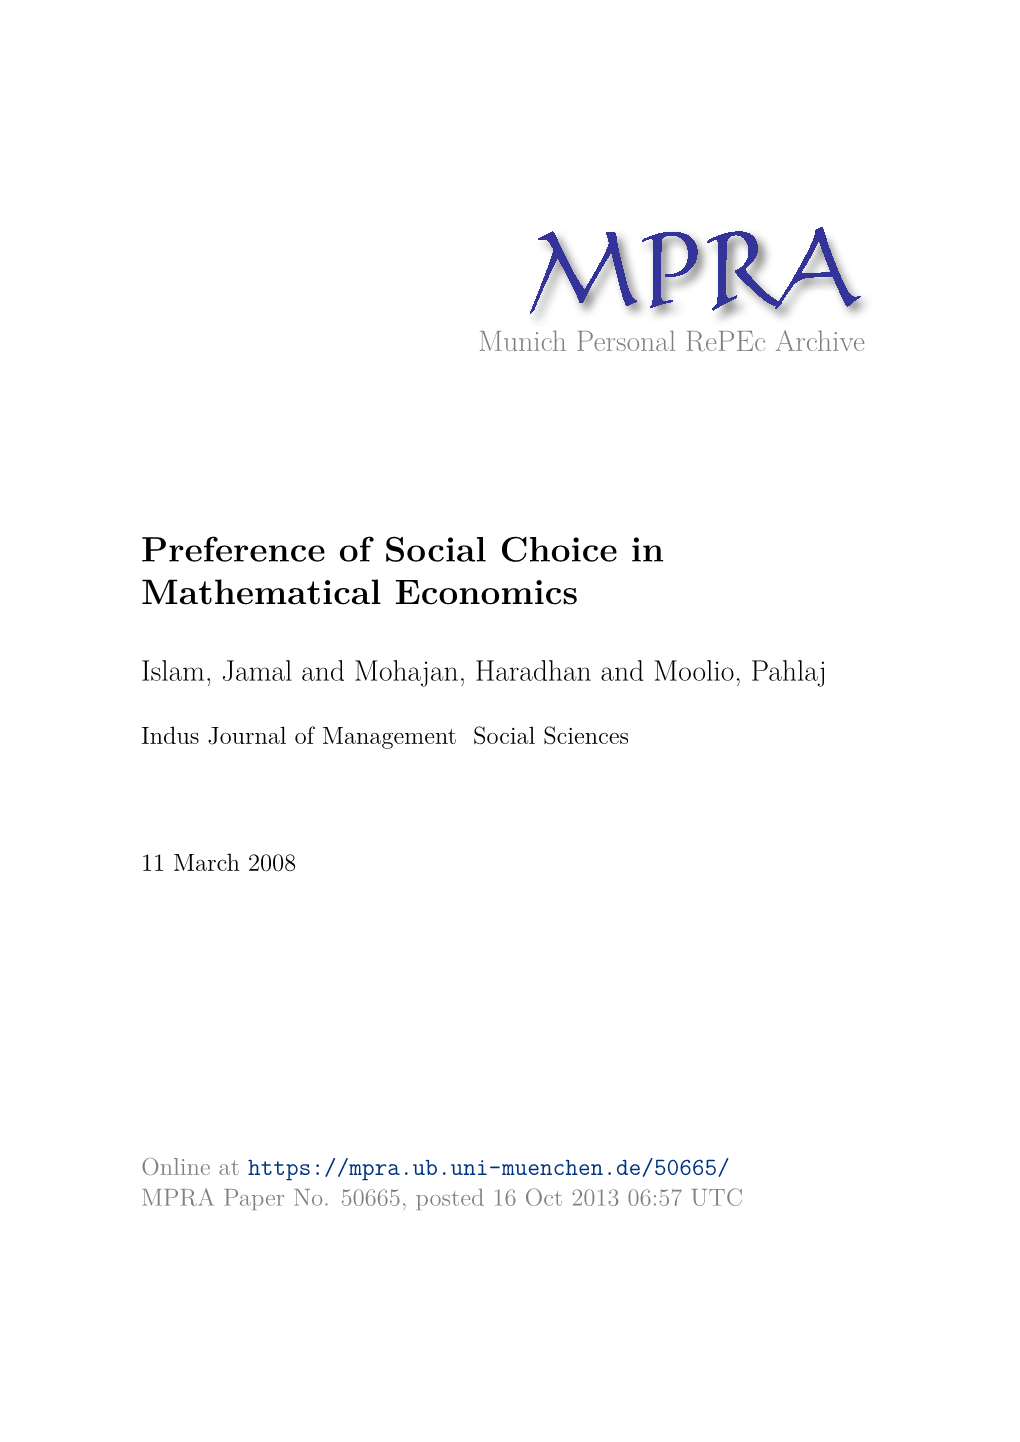 Preference of Social Choice in Mathematical Economics